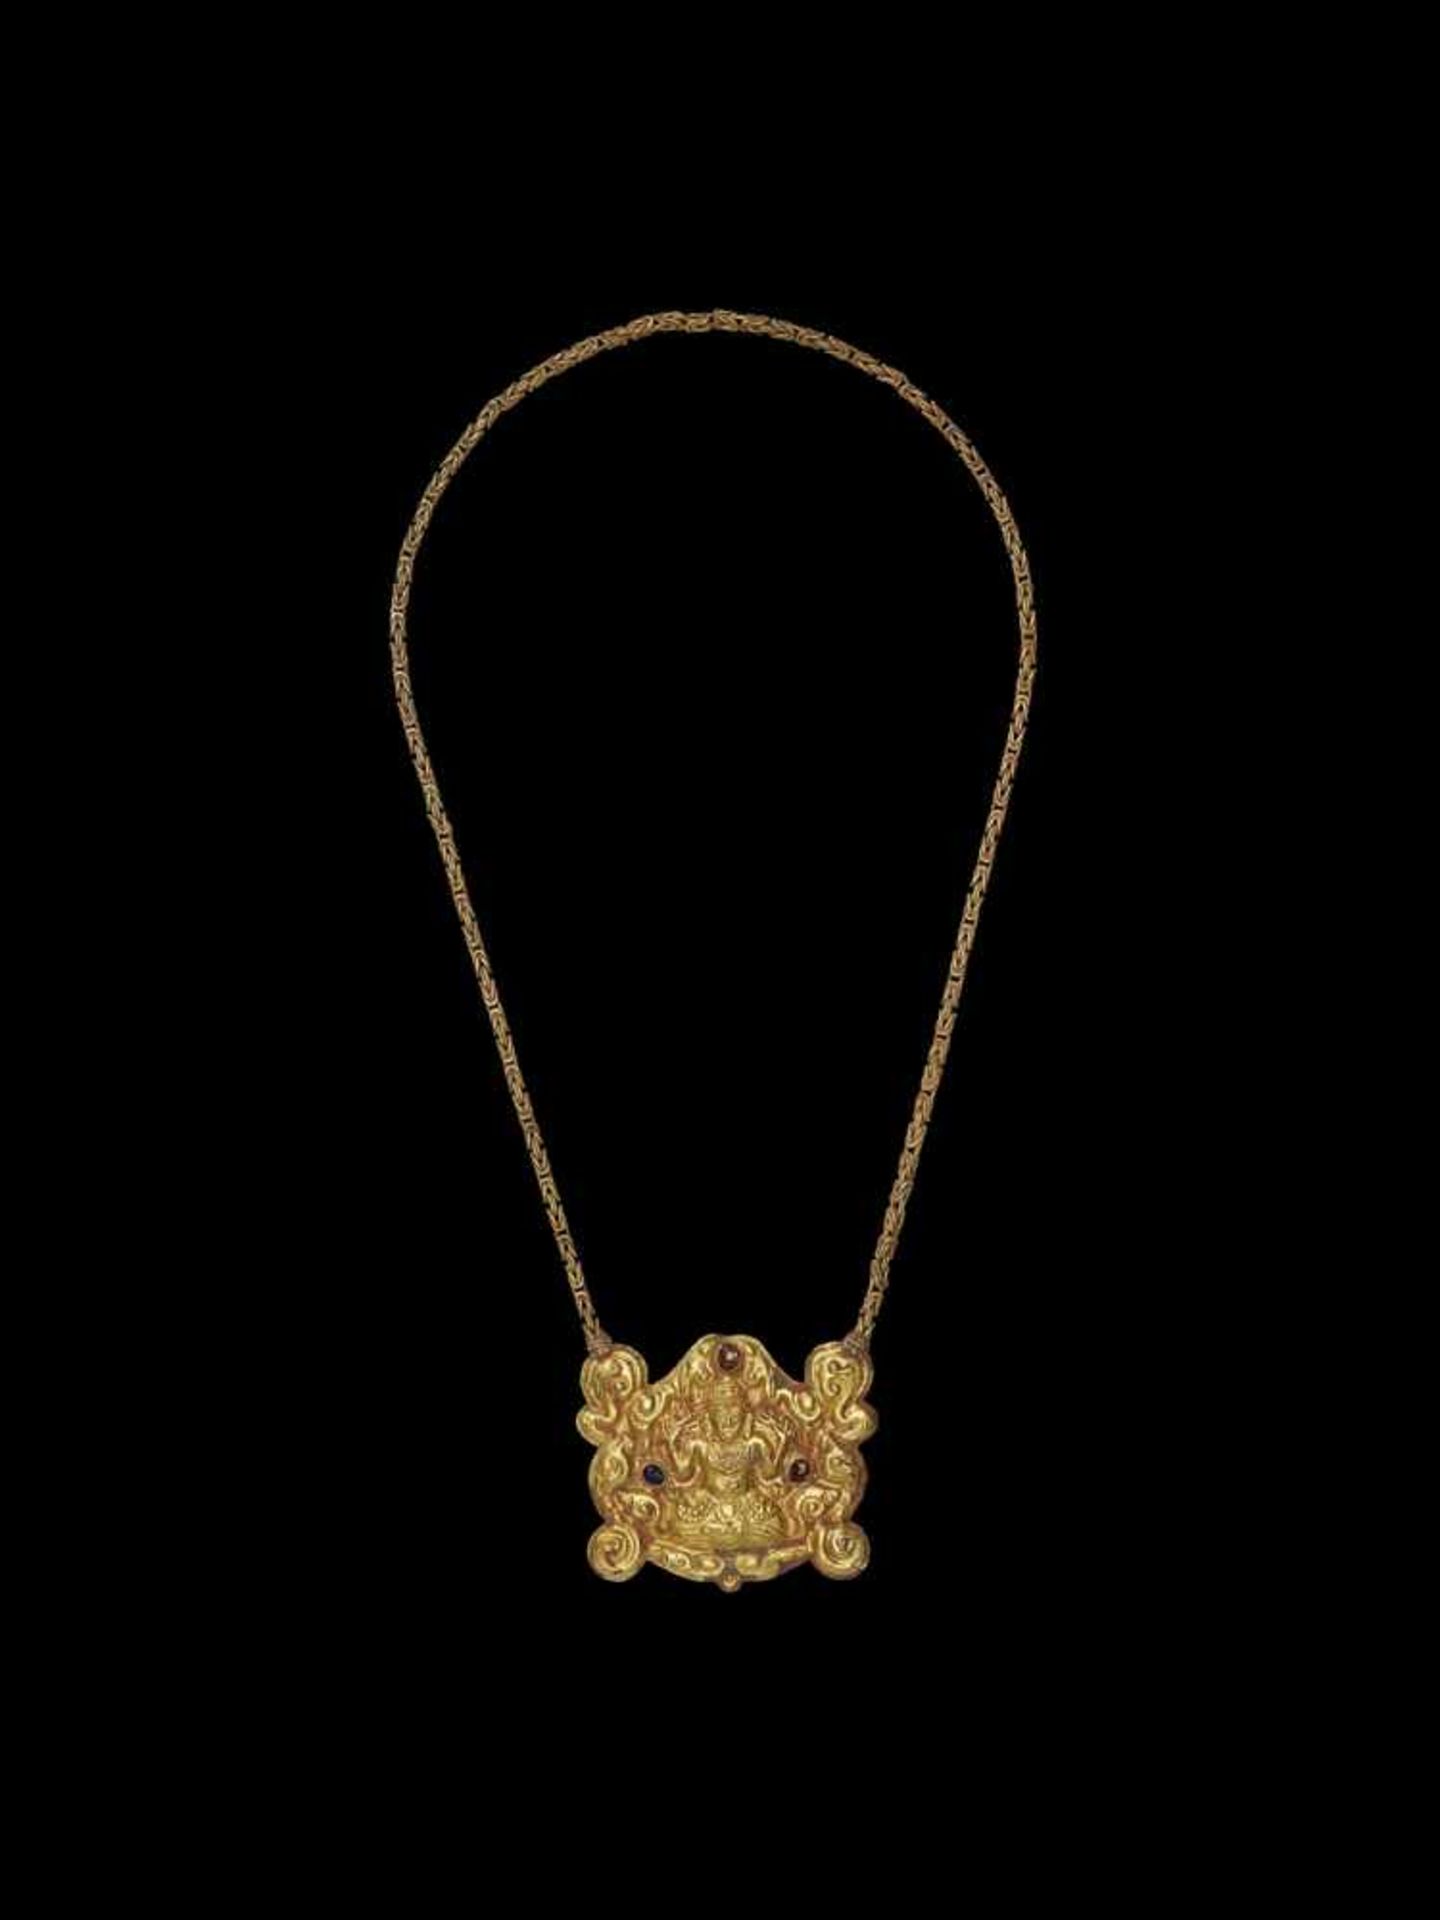 A CHAM GOLD NECKLACE WITH A FINE REPOUSSÉ GOLD PECTORAL DEPICTING SHIVA Central Cham kingdom, most